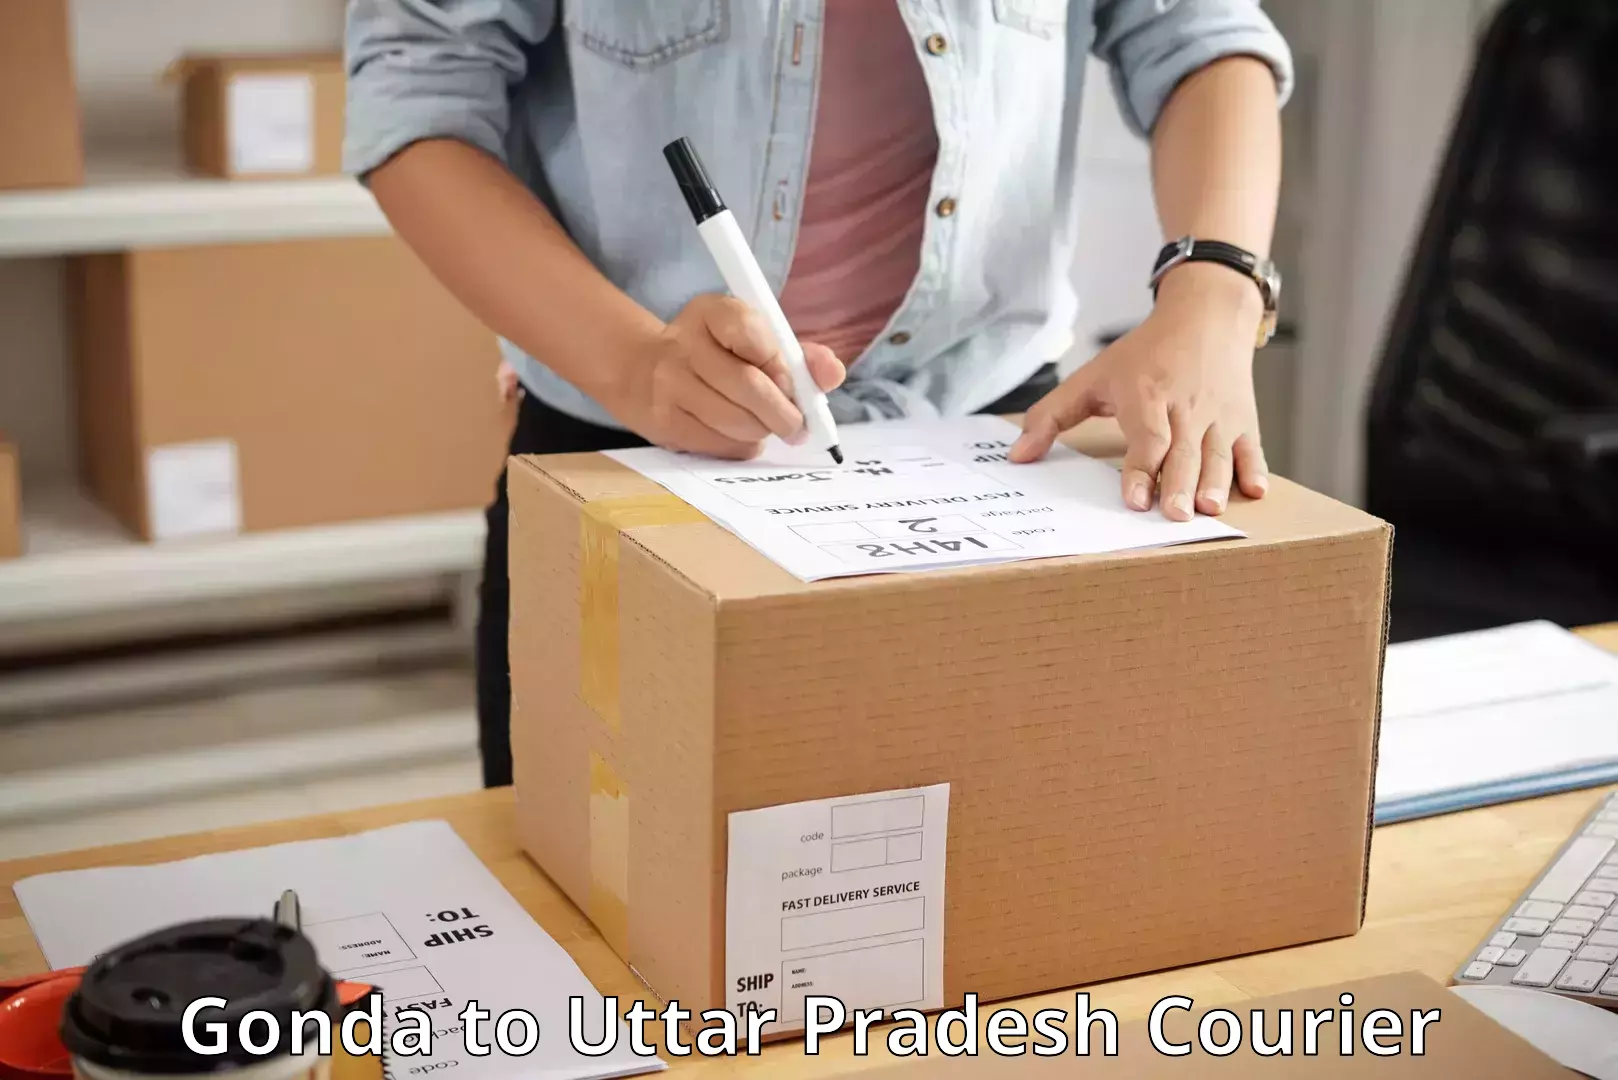 Affordable parcel service in Gonda to Sonbhadra